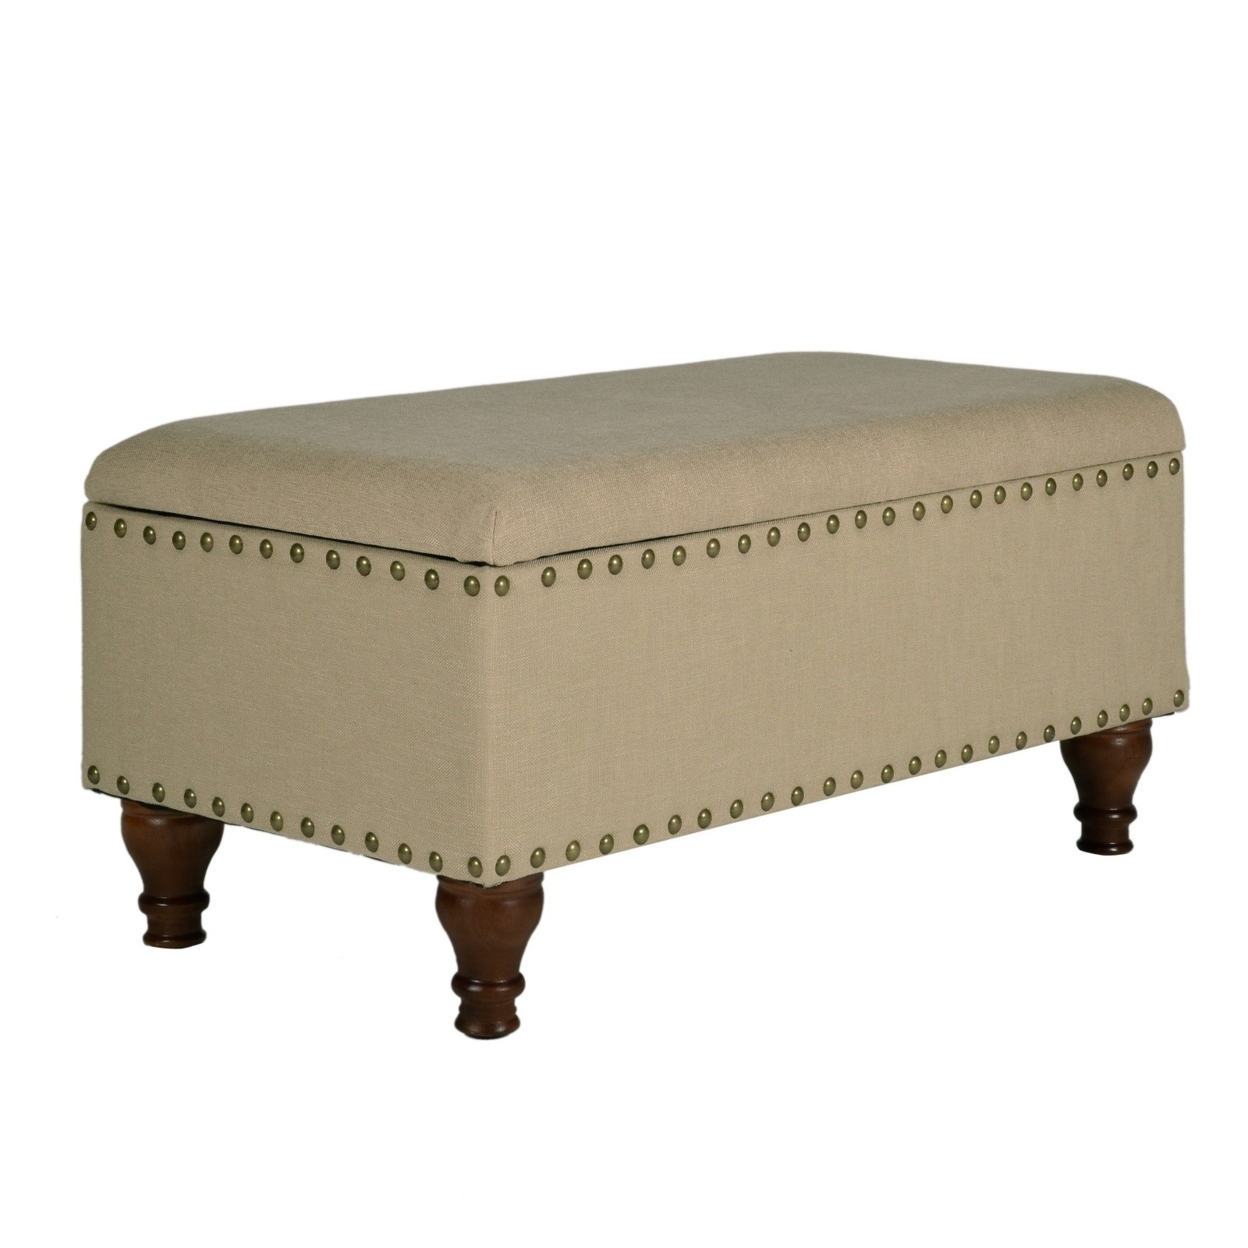 Saltoro Sherpi Fabric Upholstered Wooden Storage Bench With Nail head Trim, Large, Beige and Brown